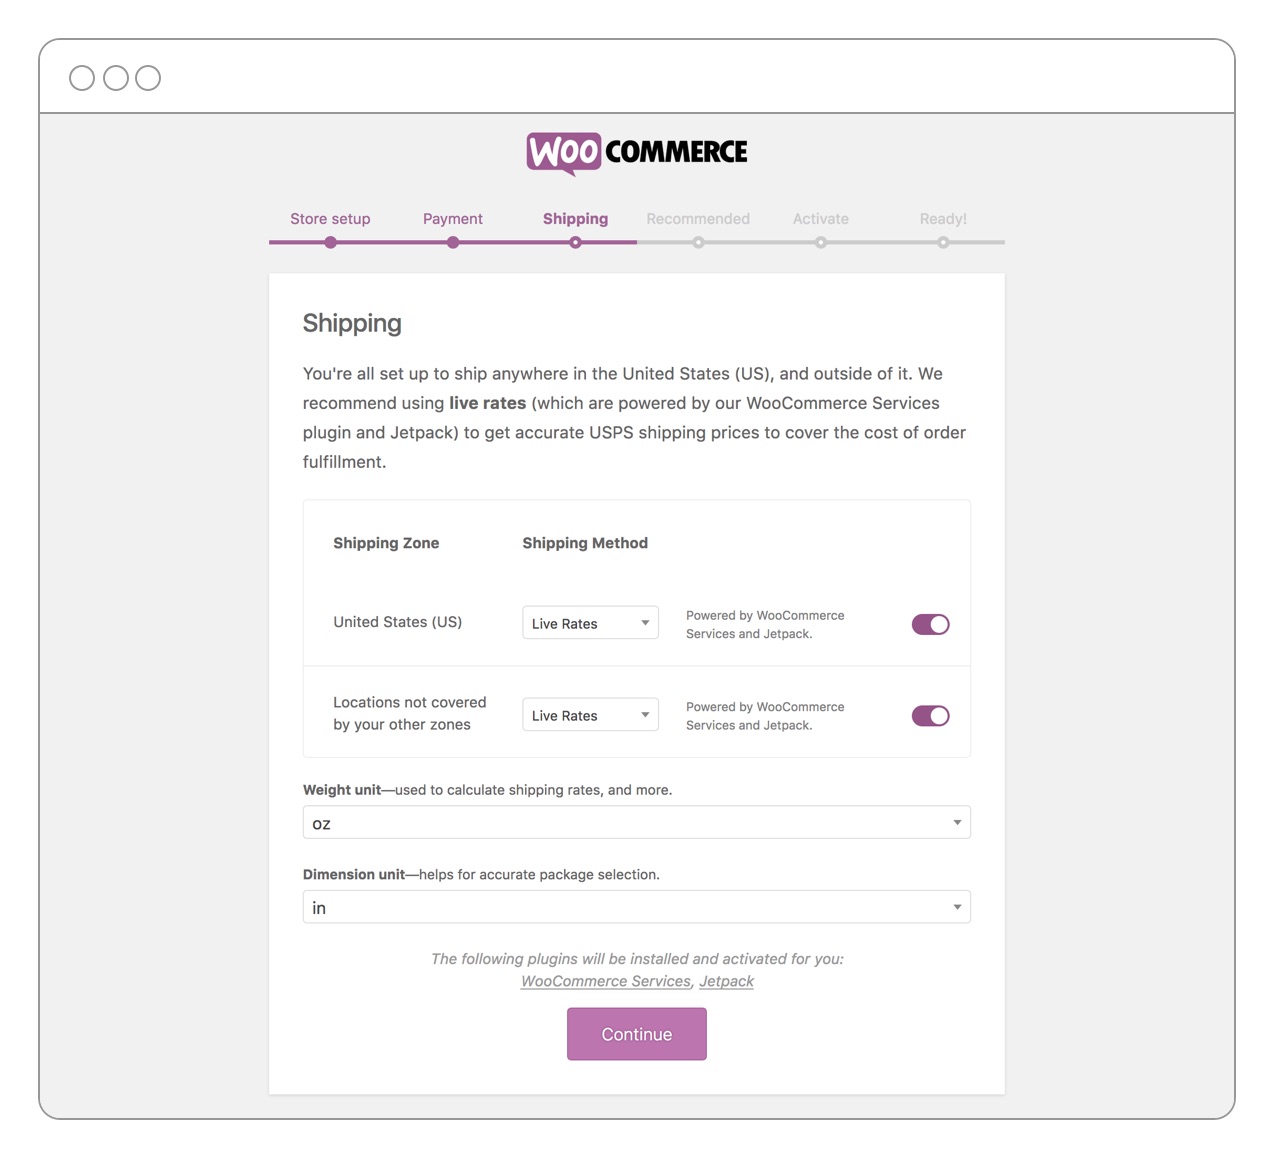 The WooCommerce onboarding wizard will set up WooCommerce Shipping if your geo-location indicates you are eligible for the service